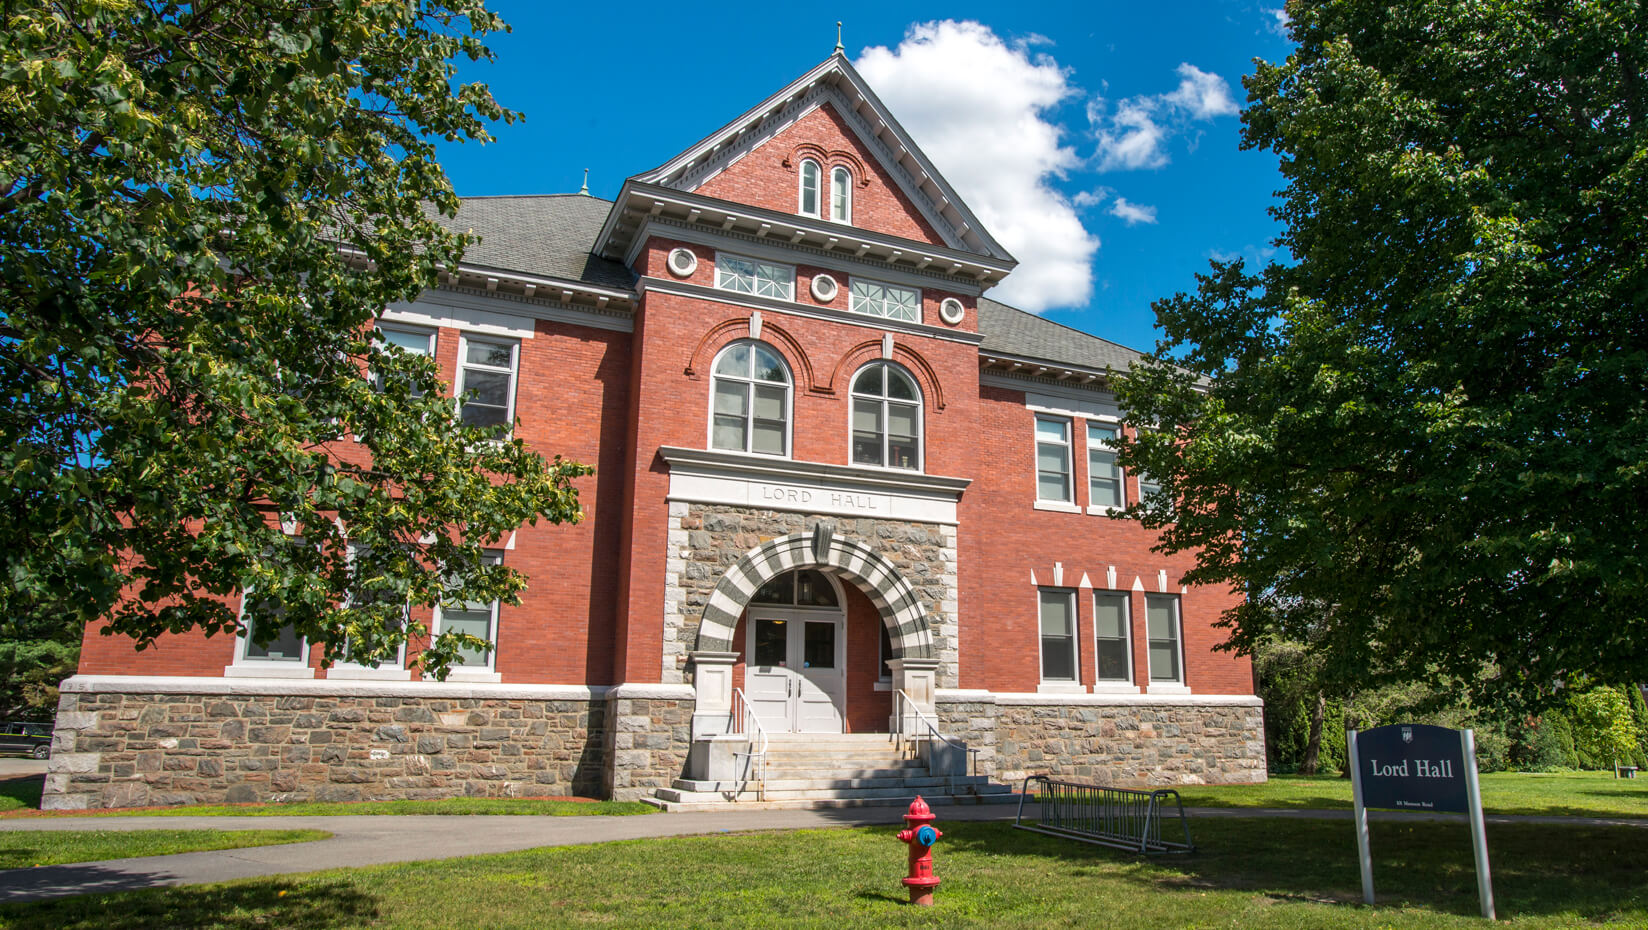 Lord Hall, home of UMaine's Department of Art